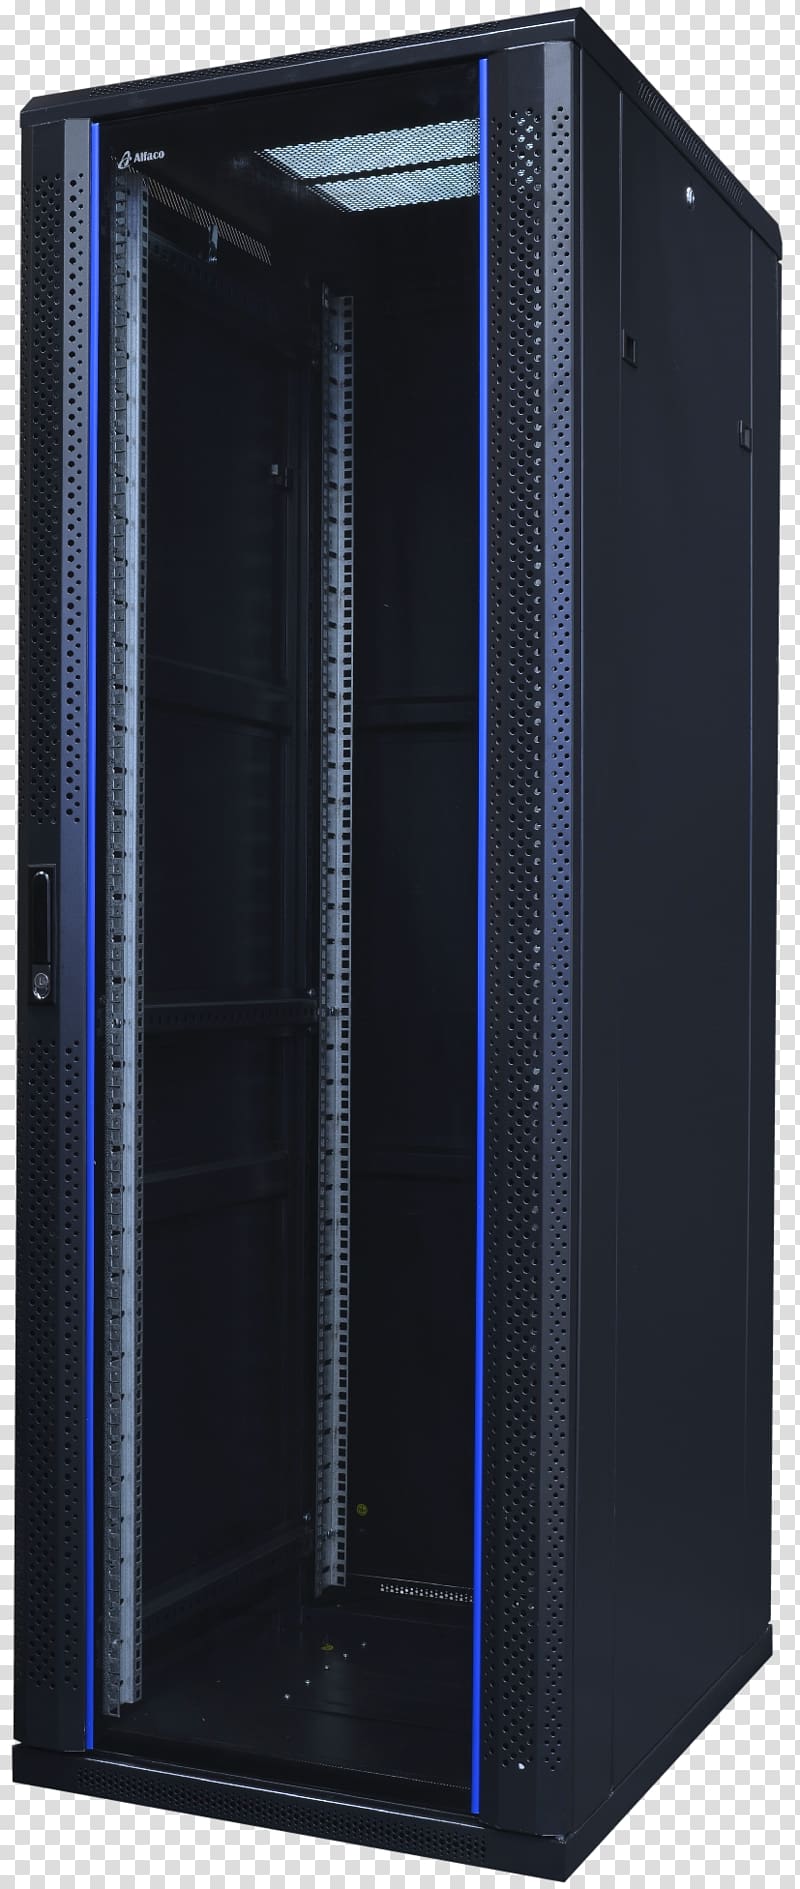 Computer Cases & Housings Computer Servers, 19-inch Rack transparent background PNG clipart